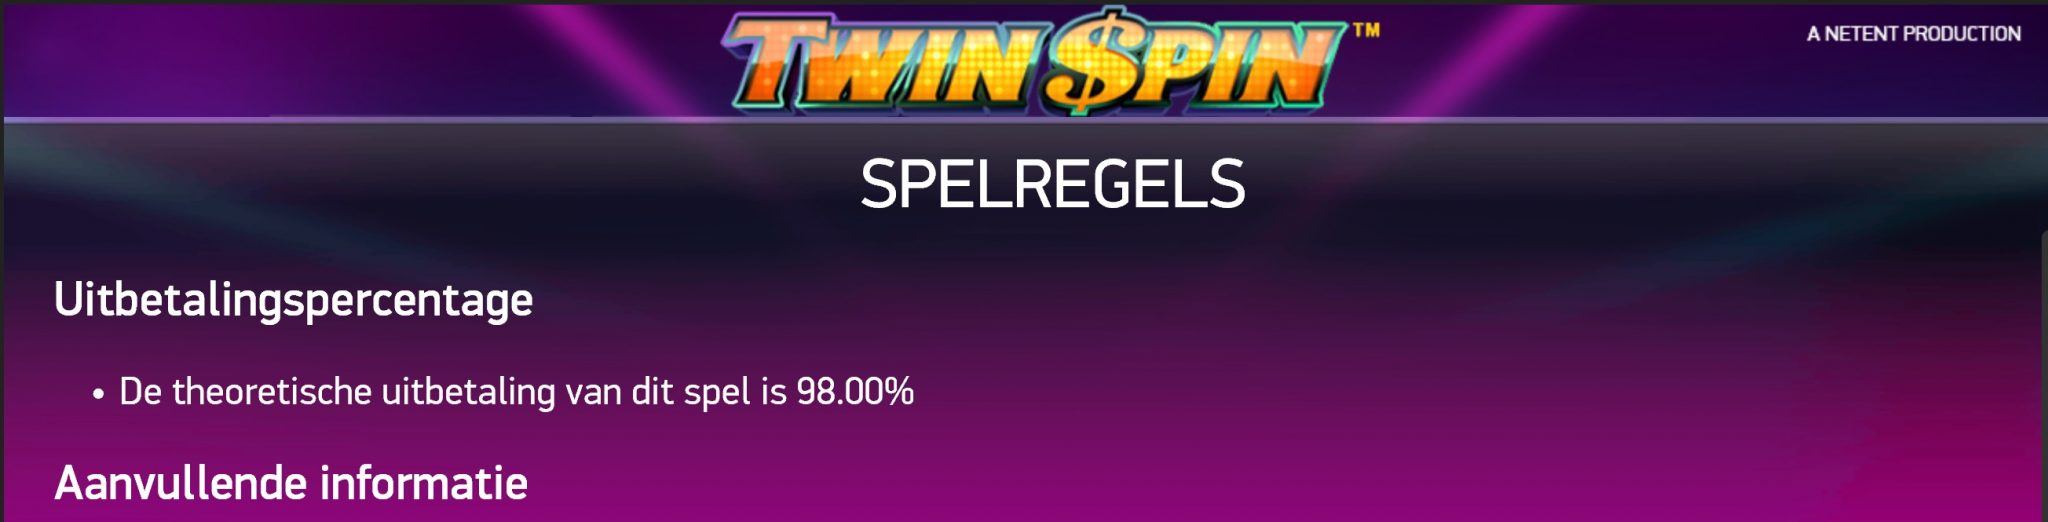 Twin-Spin-98 unibet